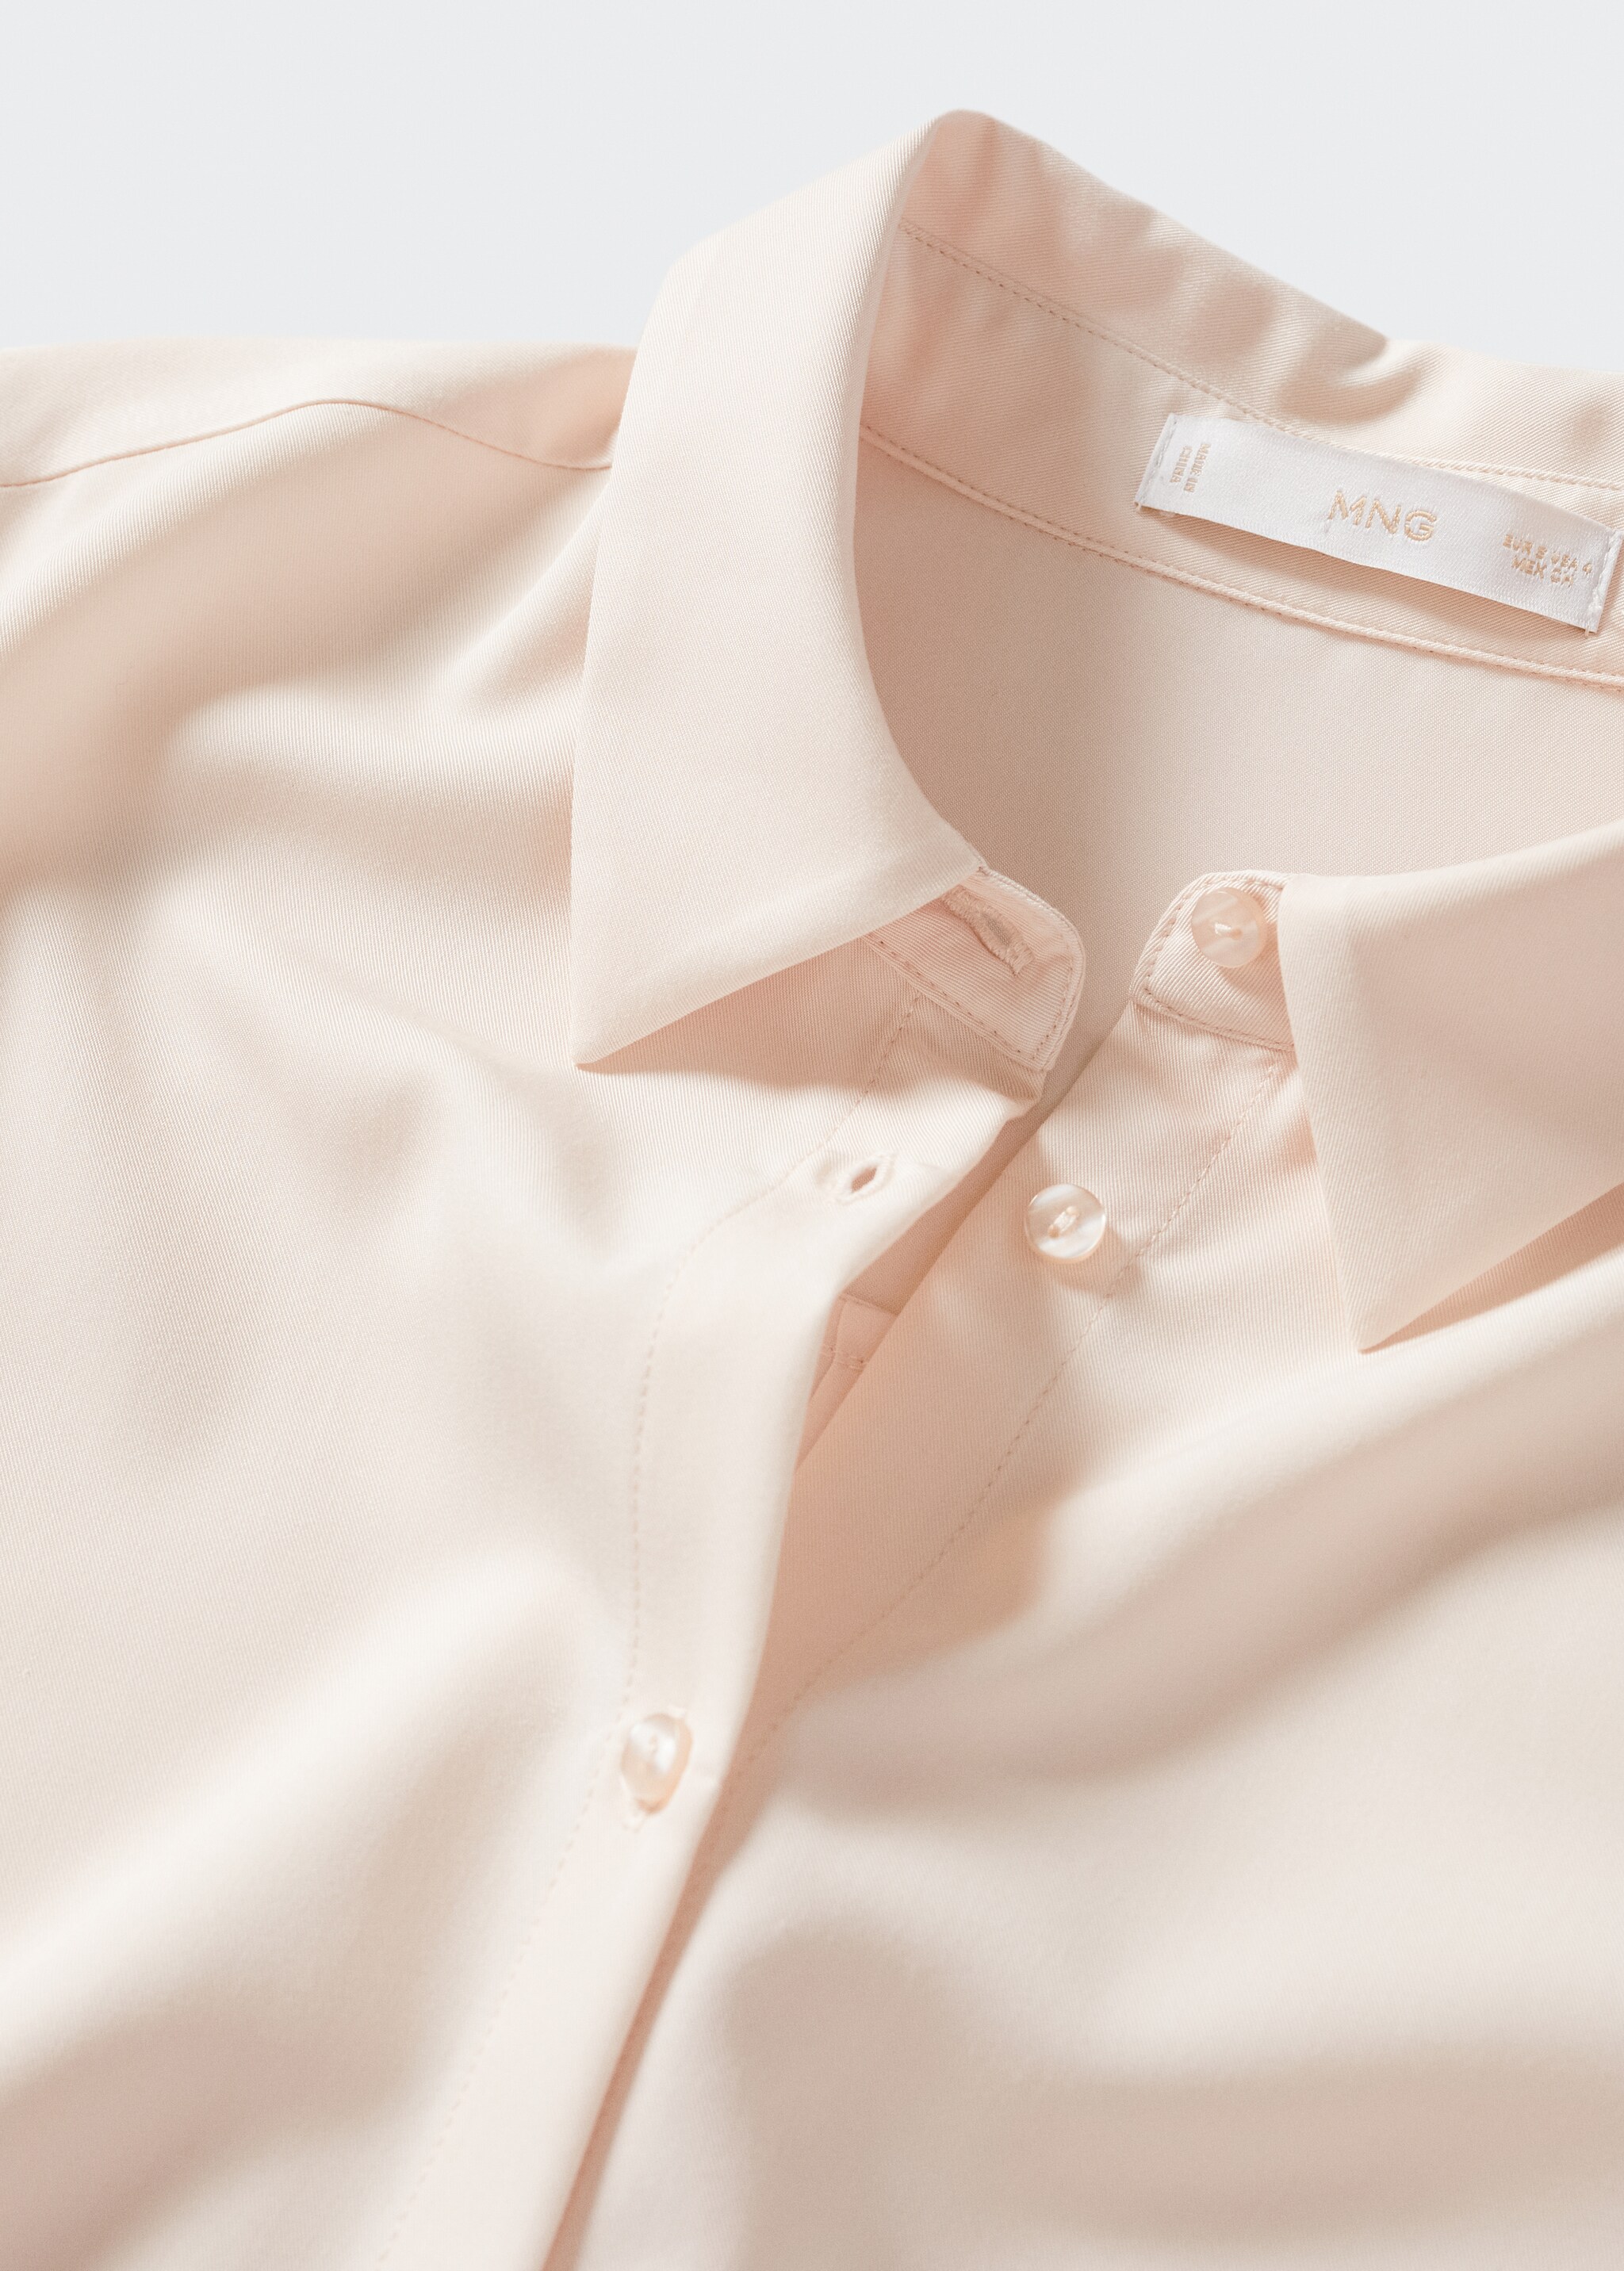 Bow shirt dress - Details of the article 8